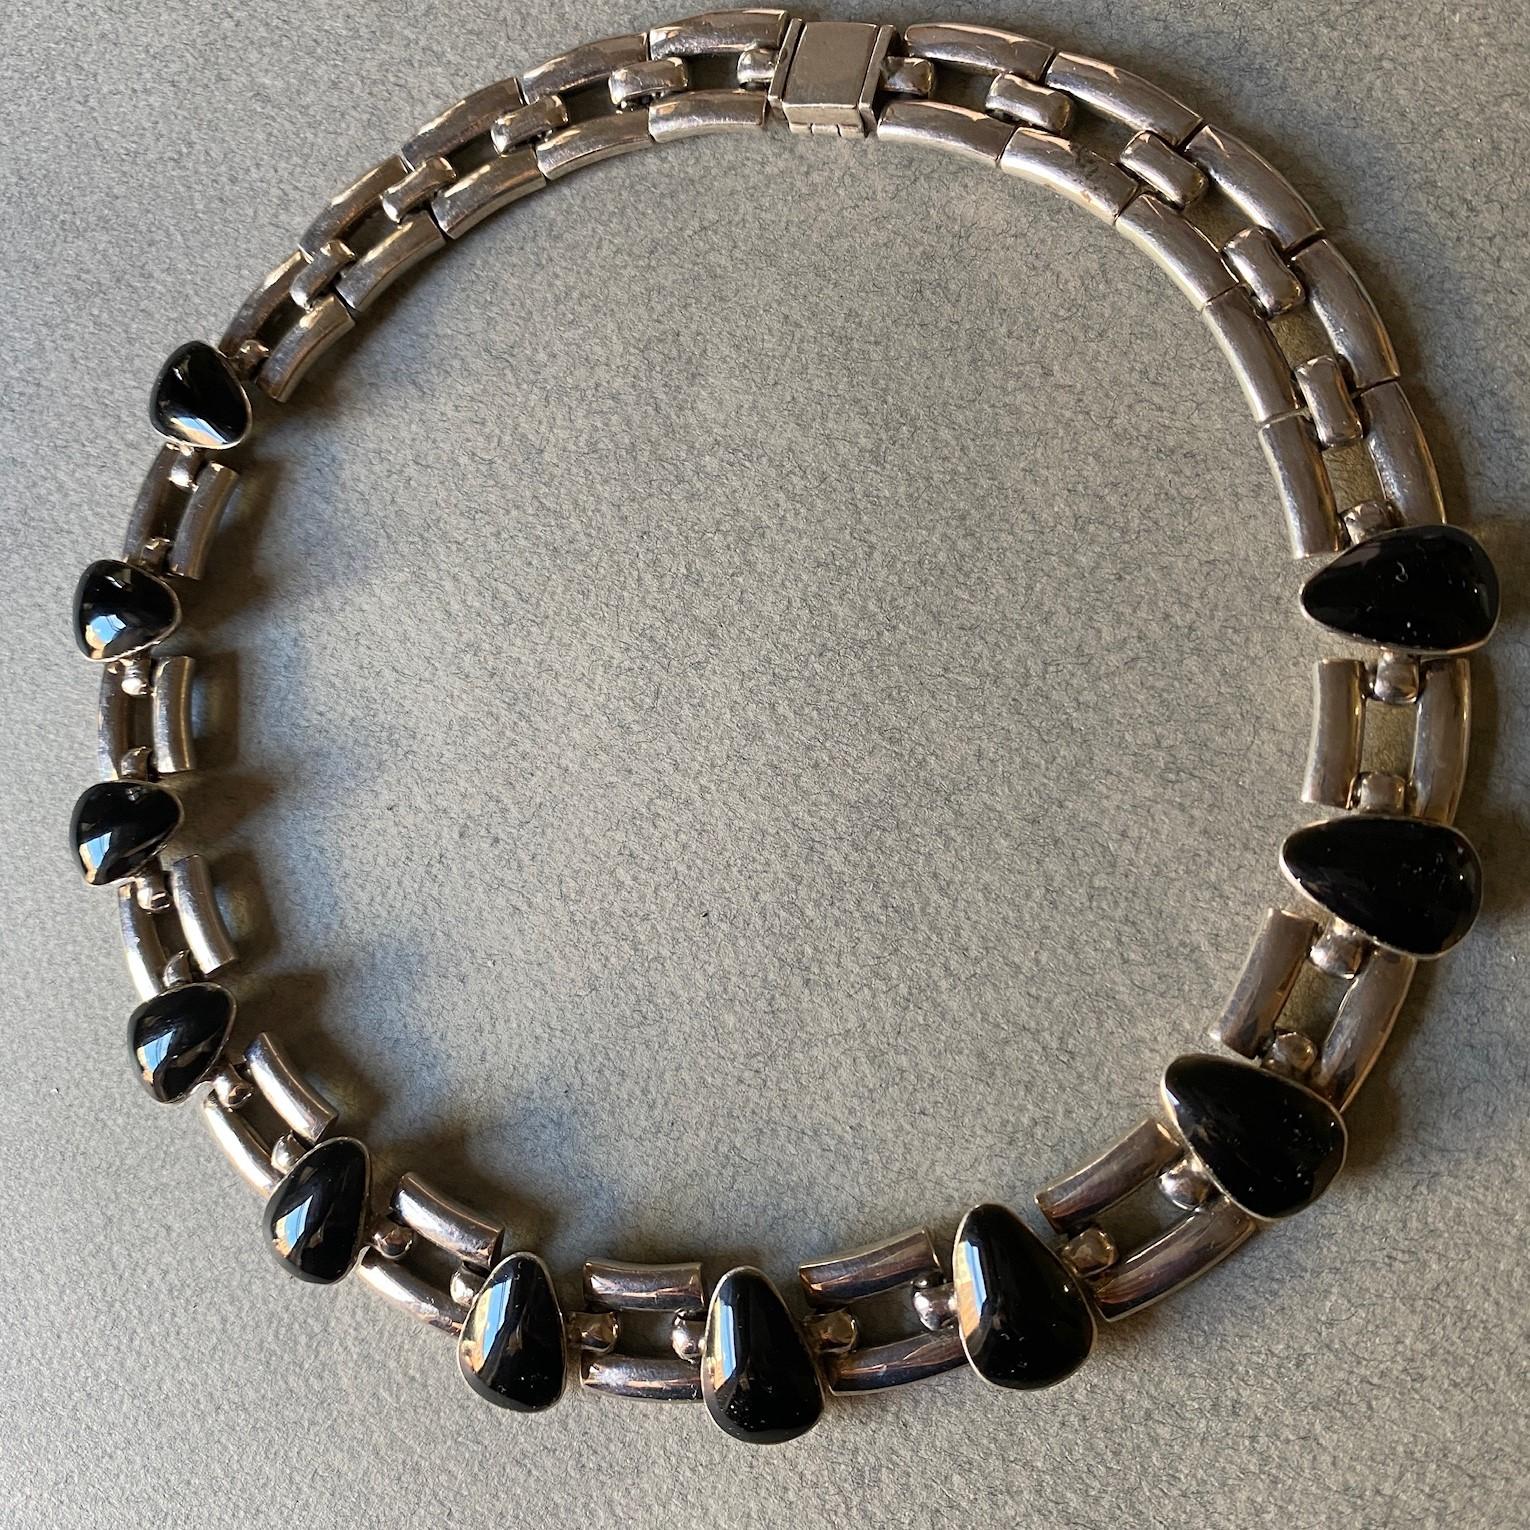  Sterling Silver and Onyx Collar Necklace by Antonio Pineda



Designer: Antonio Pineda
Maker: Antonio Pineda
Circa: 1953-1979
Dimensions:
Country of Origin: Taxco, Mexico

INV NO: NEC-03


**Antonio Pineda was an internationally renowned Mexican